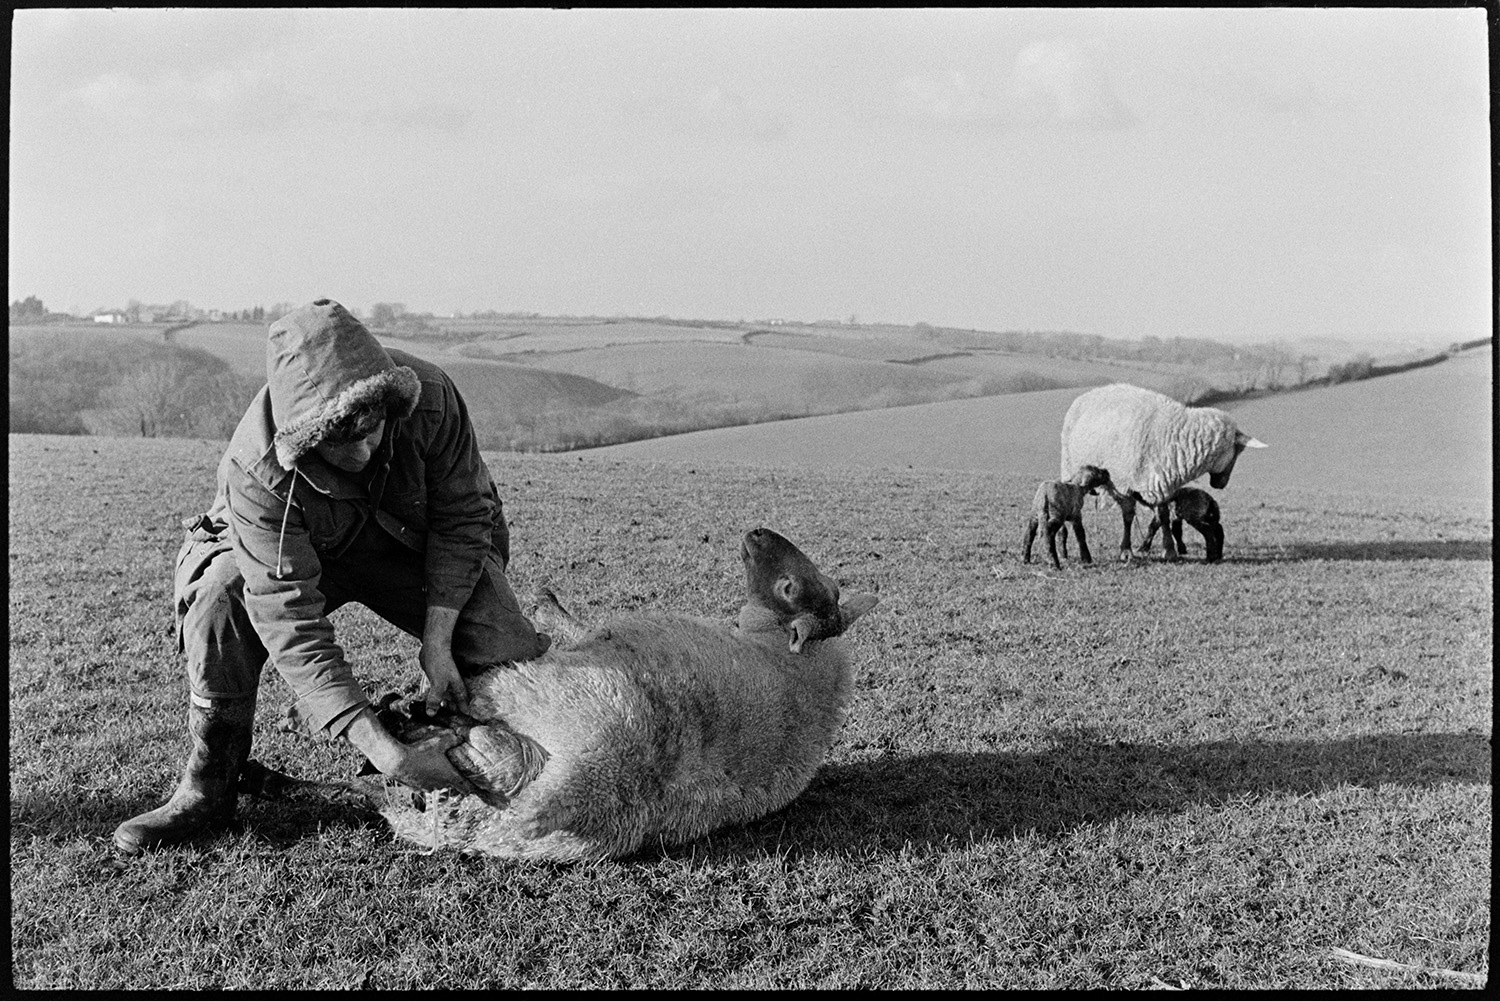 Farmer delivering lamb in field. 
[Graham Ward helping a ewe give birth in a field at Parsonage, Iddesleigh. Another ewe with two lambs can be seen in the background.]